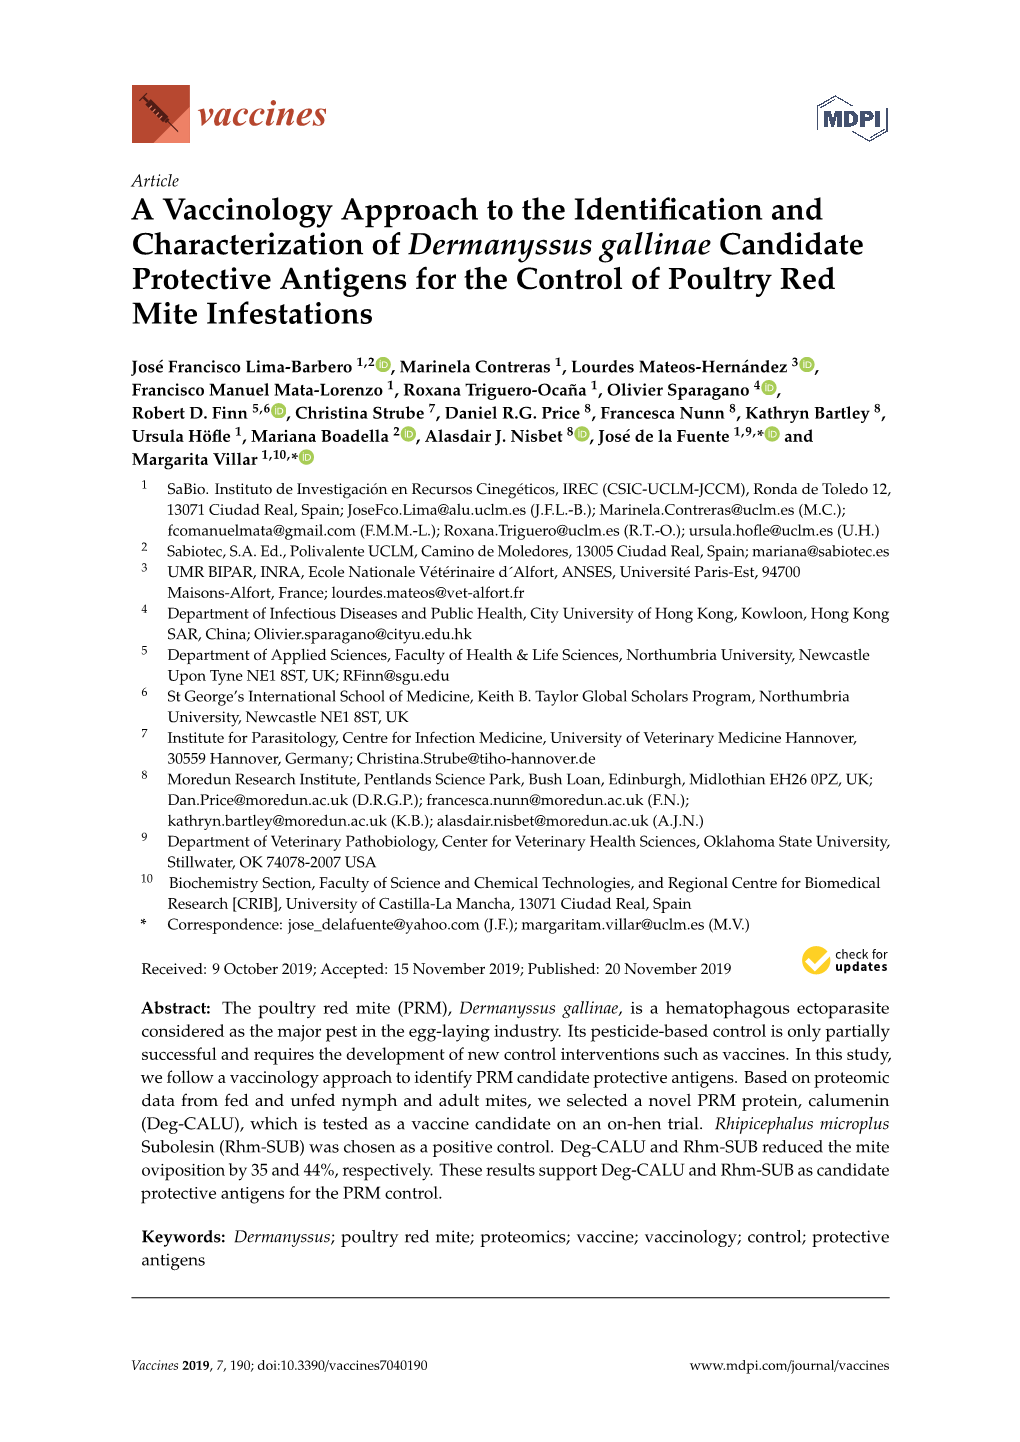 A Vaccinology Approach to the Identification and Characterization of Dermanyssus Gallinae Candidate Protective Antigens For